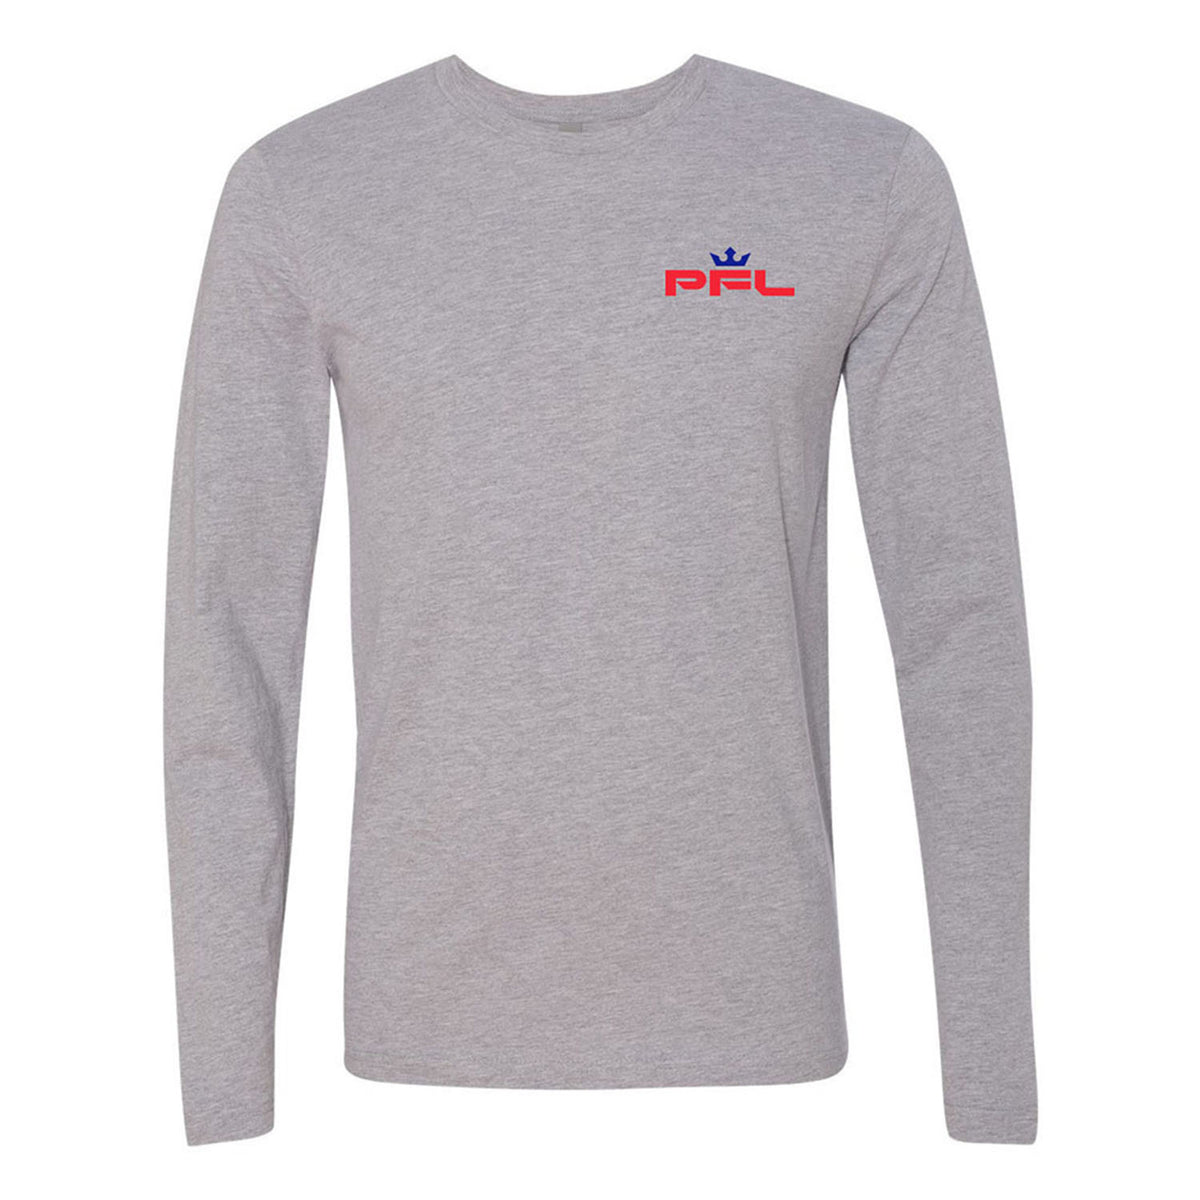 PFL Logo Long-Sleeve T-Shirt in Grey - Front View